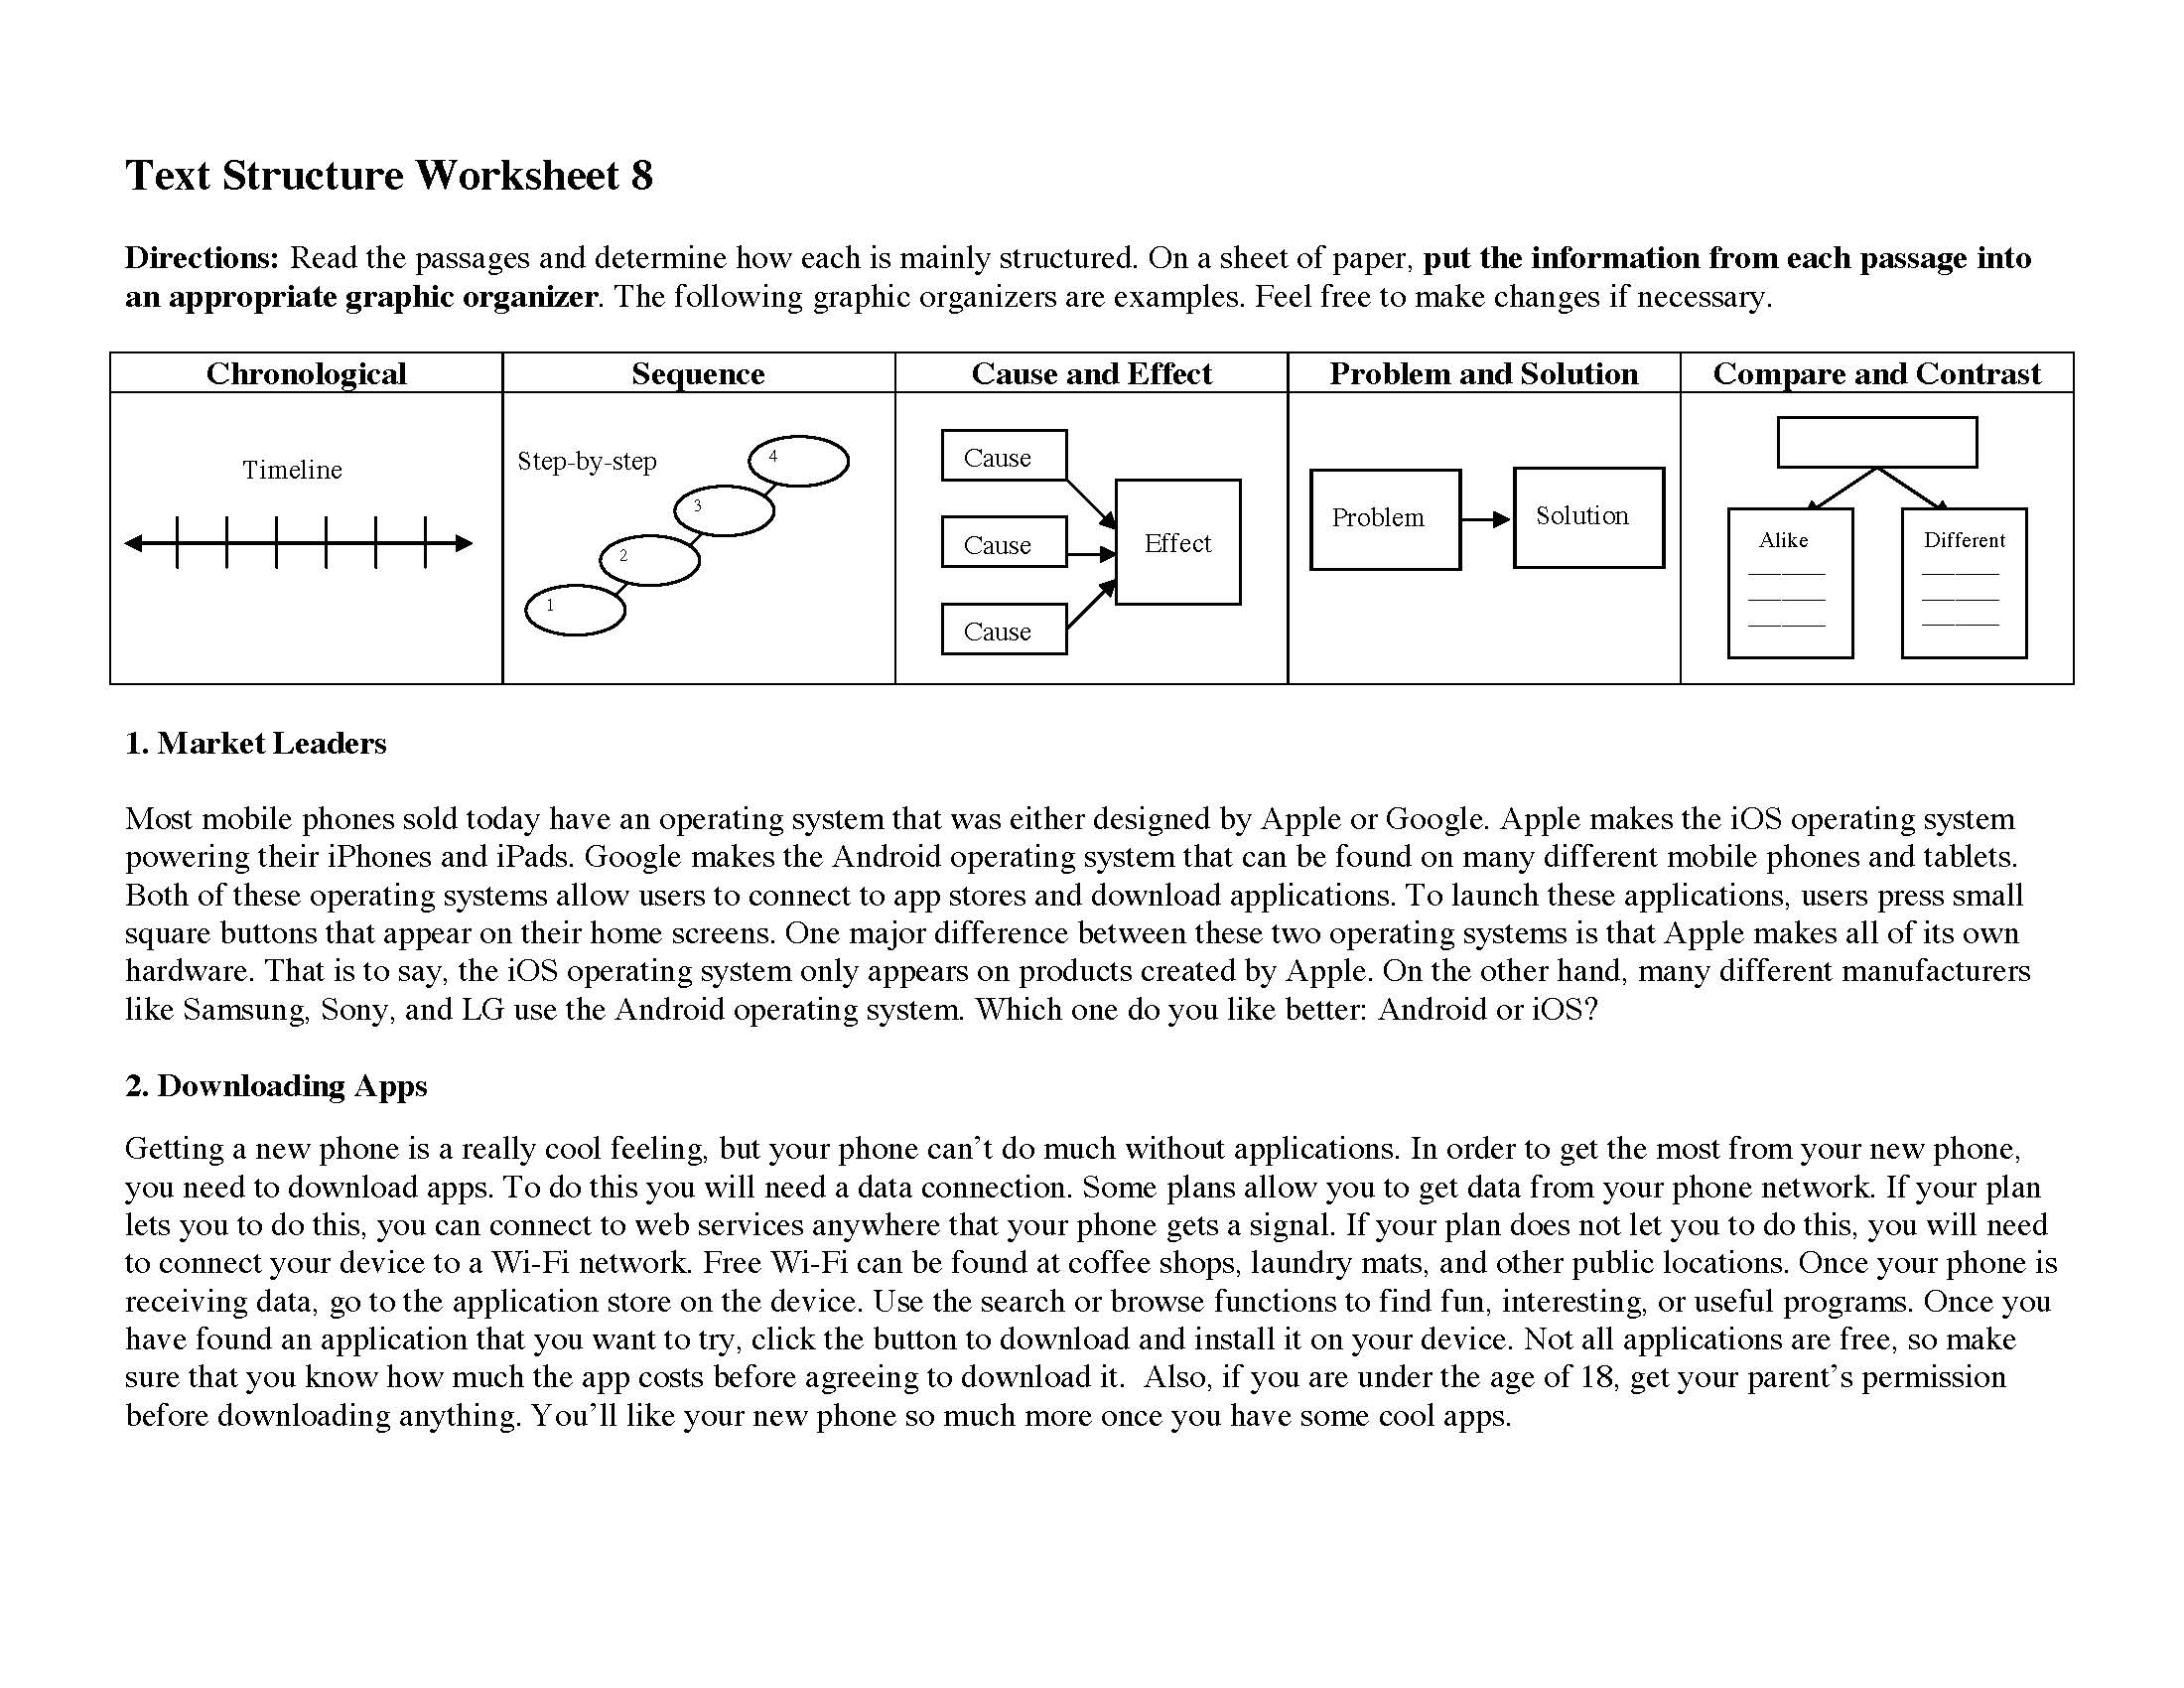 This is a preview image of Text Structure Worksheet 8. Click on it to enlarge it or view the source file.